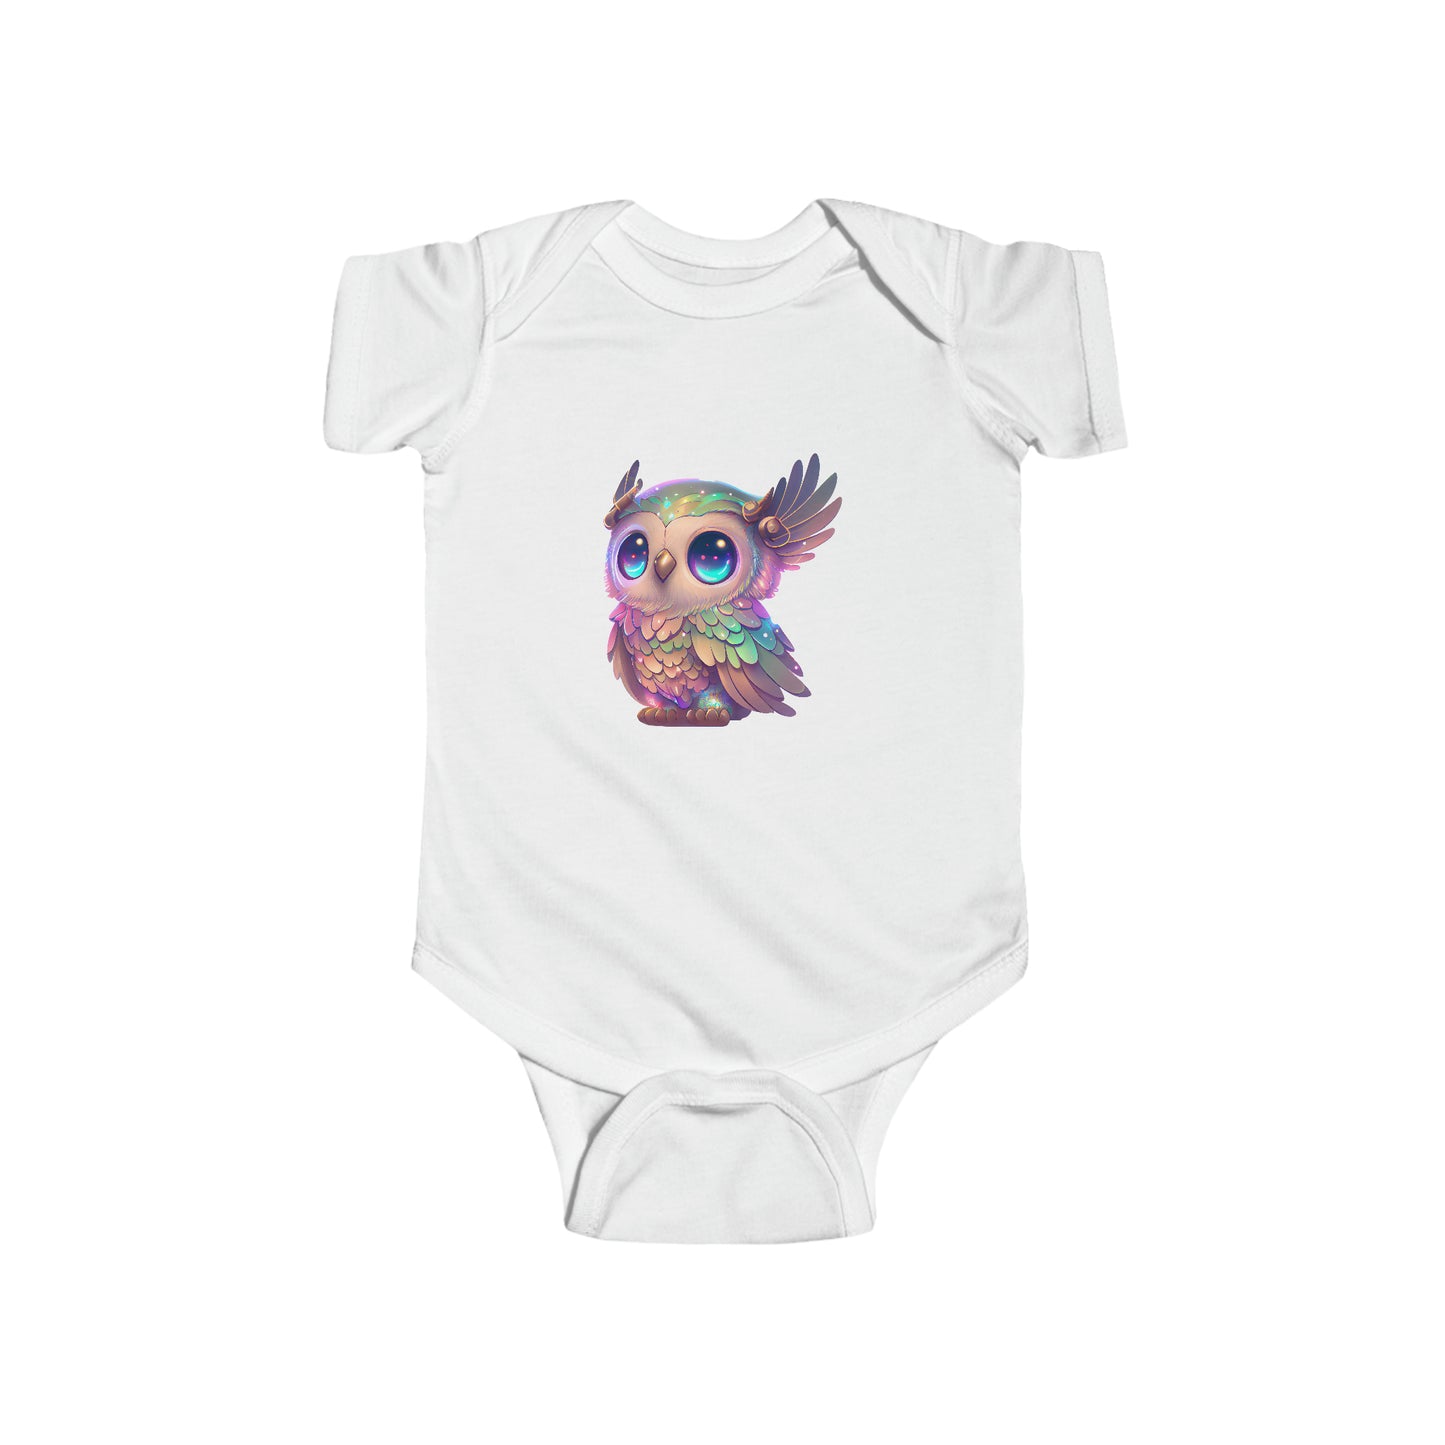 Rainbow Owl Infant Fine Jersey Bodysuit, Plastic Snaps At The Cross Closure For Easy Changing Access